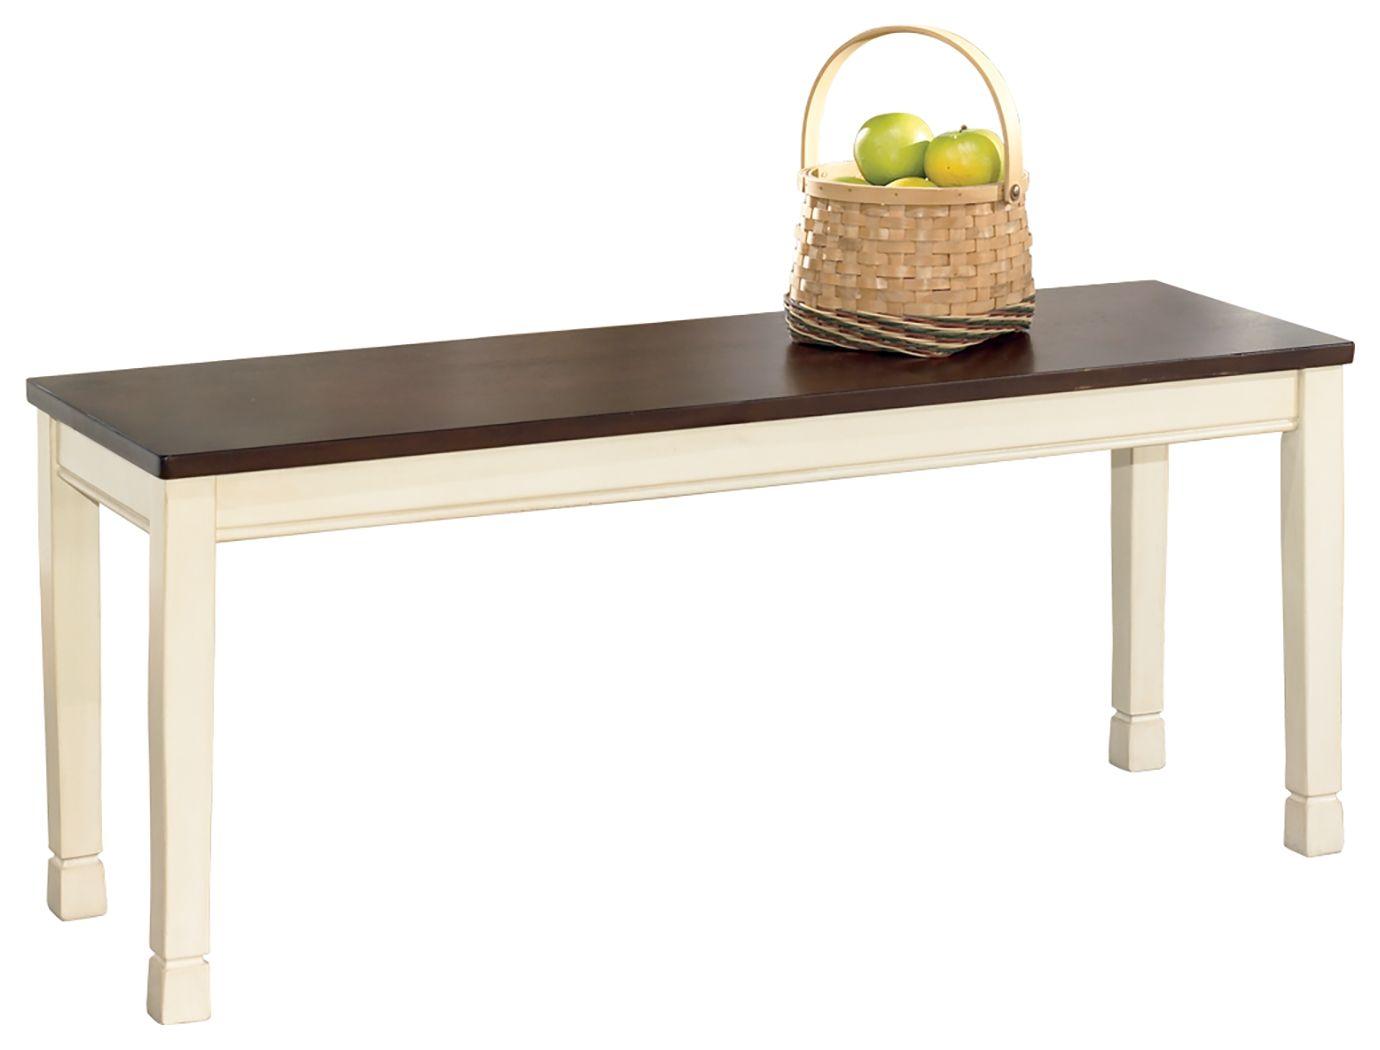 Ashley Furniture - Whitesburg - Brown / Cottage White - Large Dining Room Bench - 5th Avenue Furniture